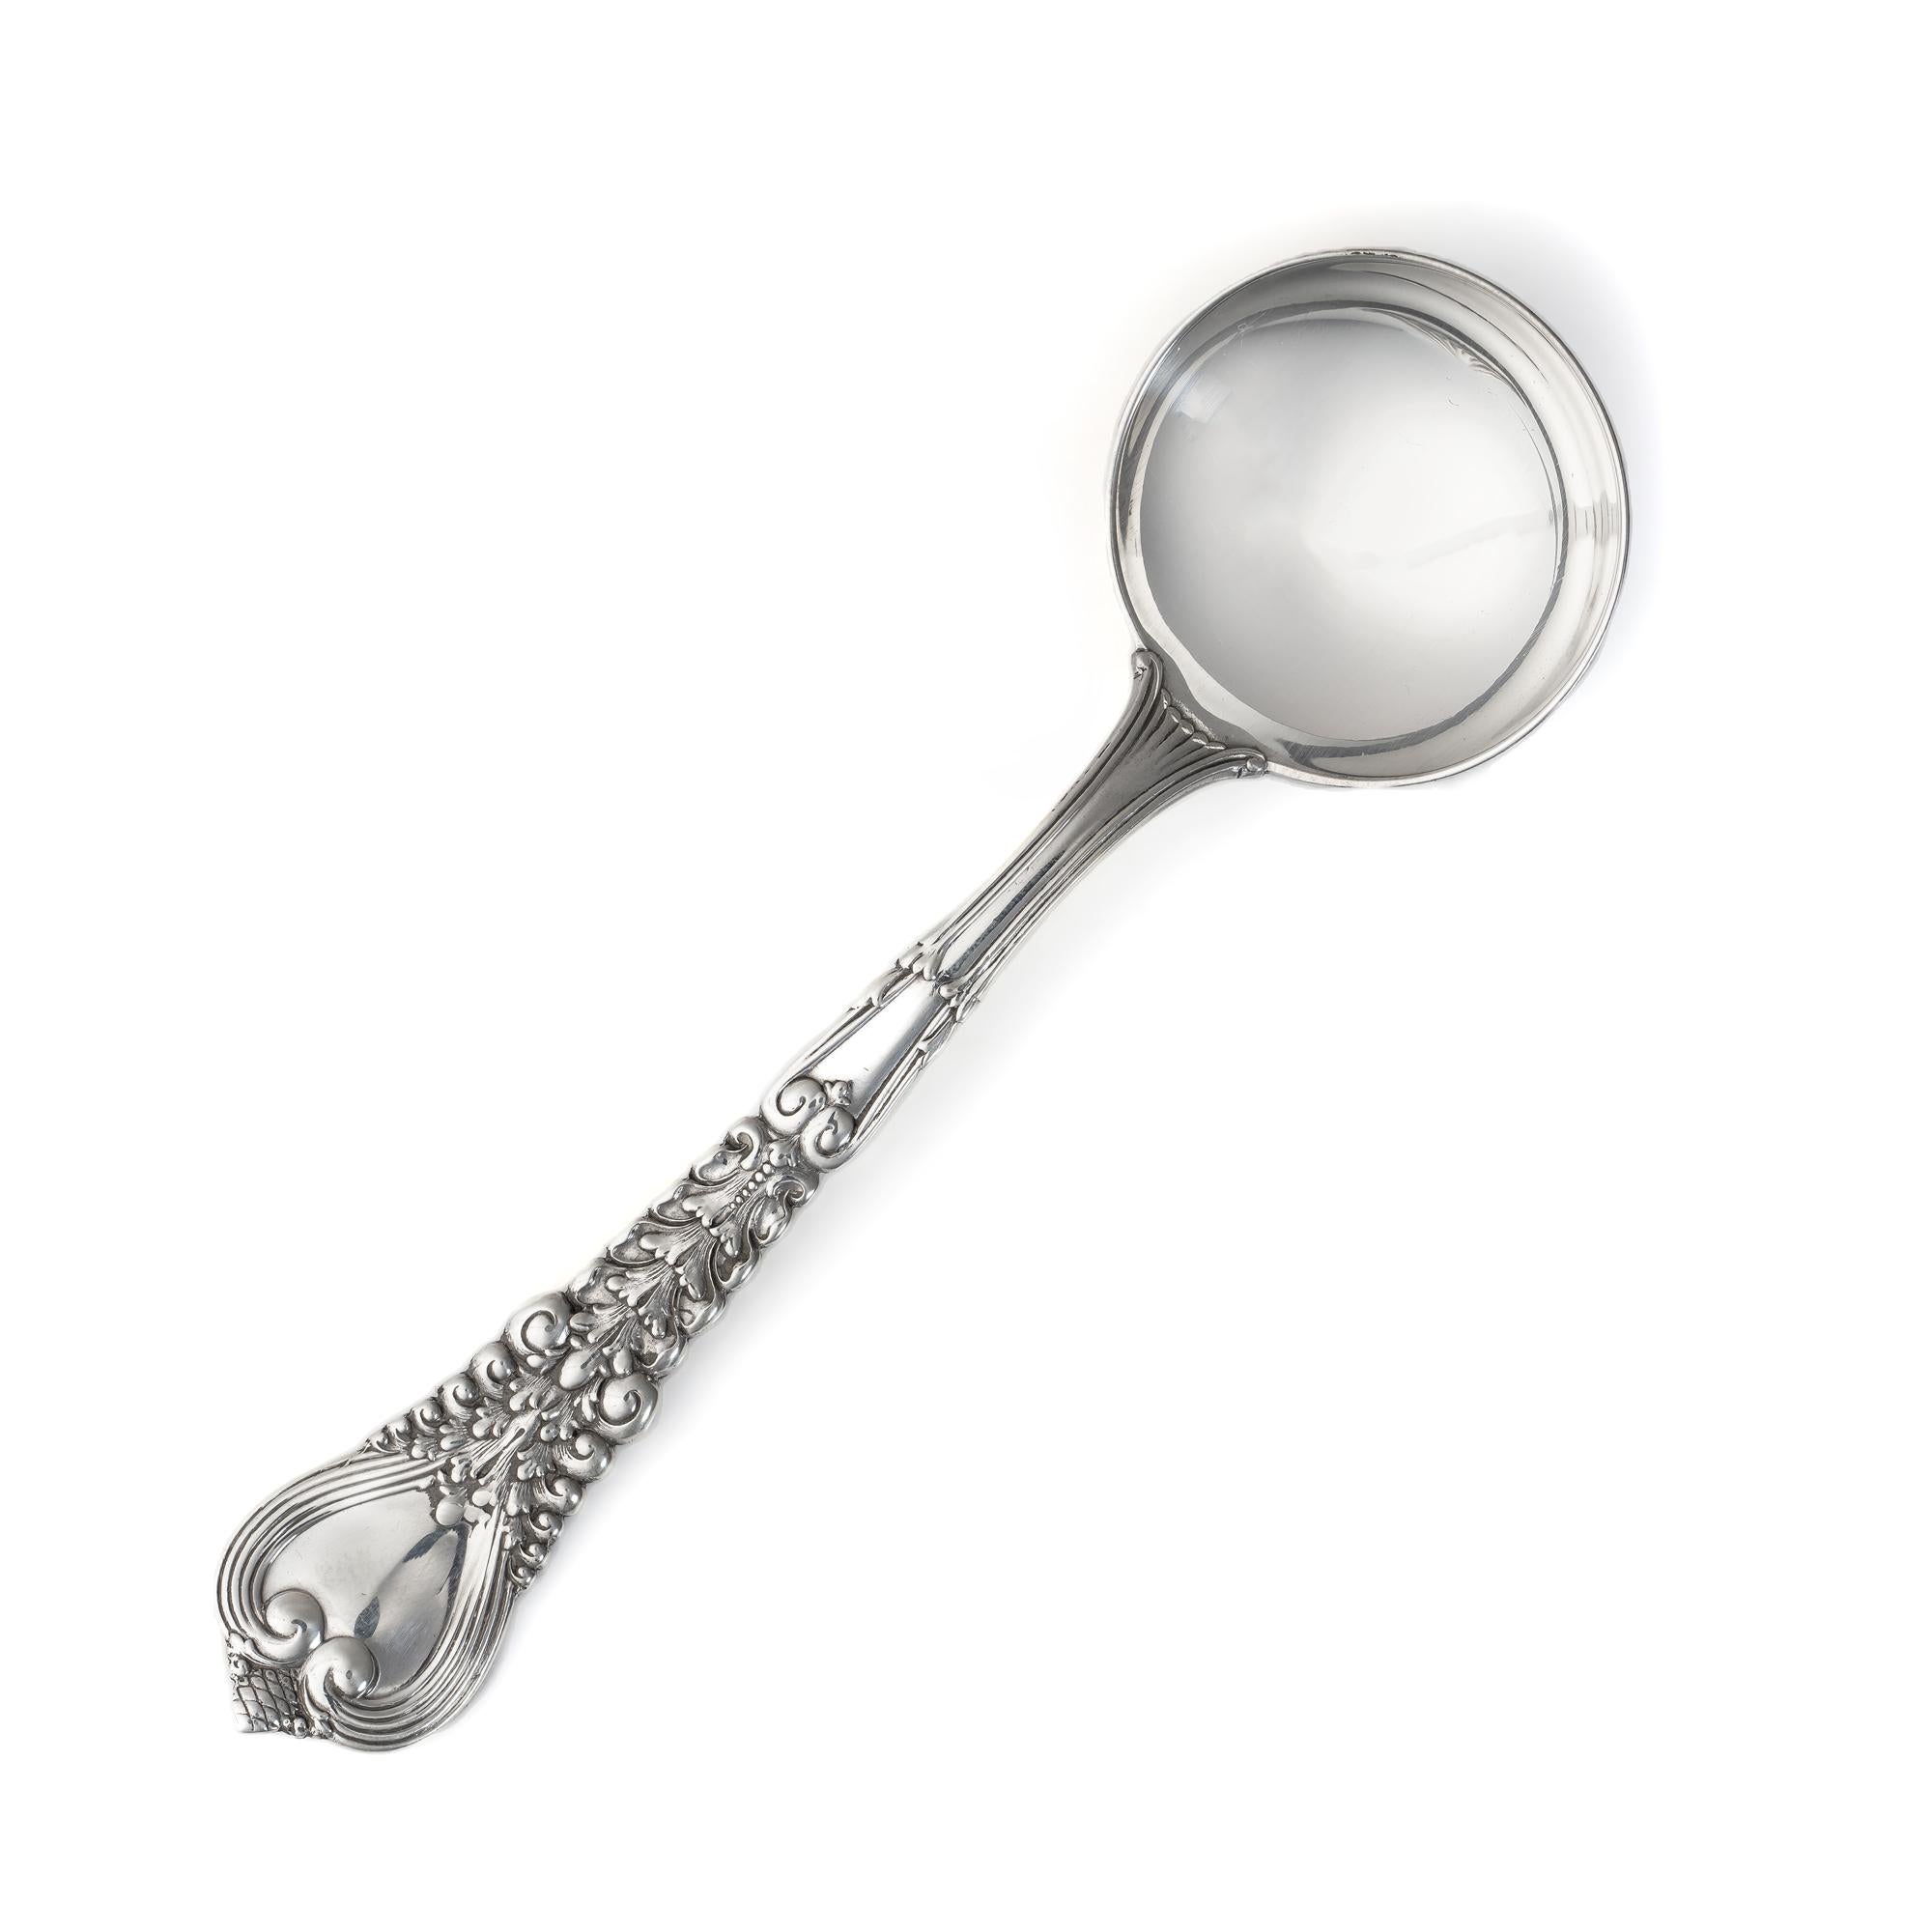 Antique Tiffany & Co. Sterling Silver Florentine Pattern Salt Spoon In Good Condition For Sale In Braintree, GB